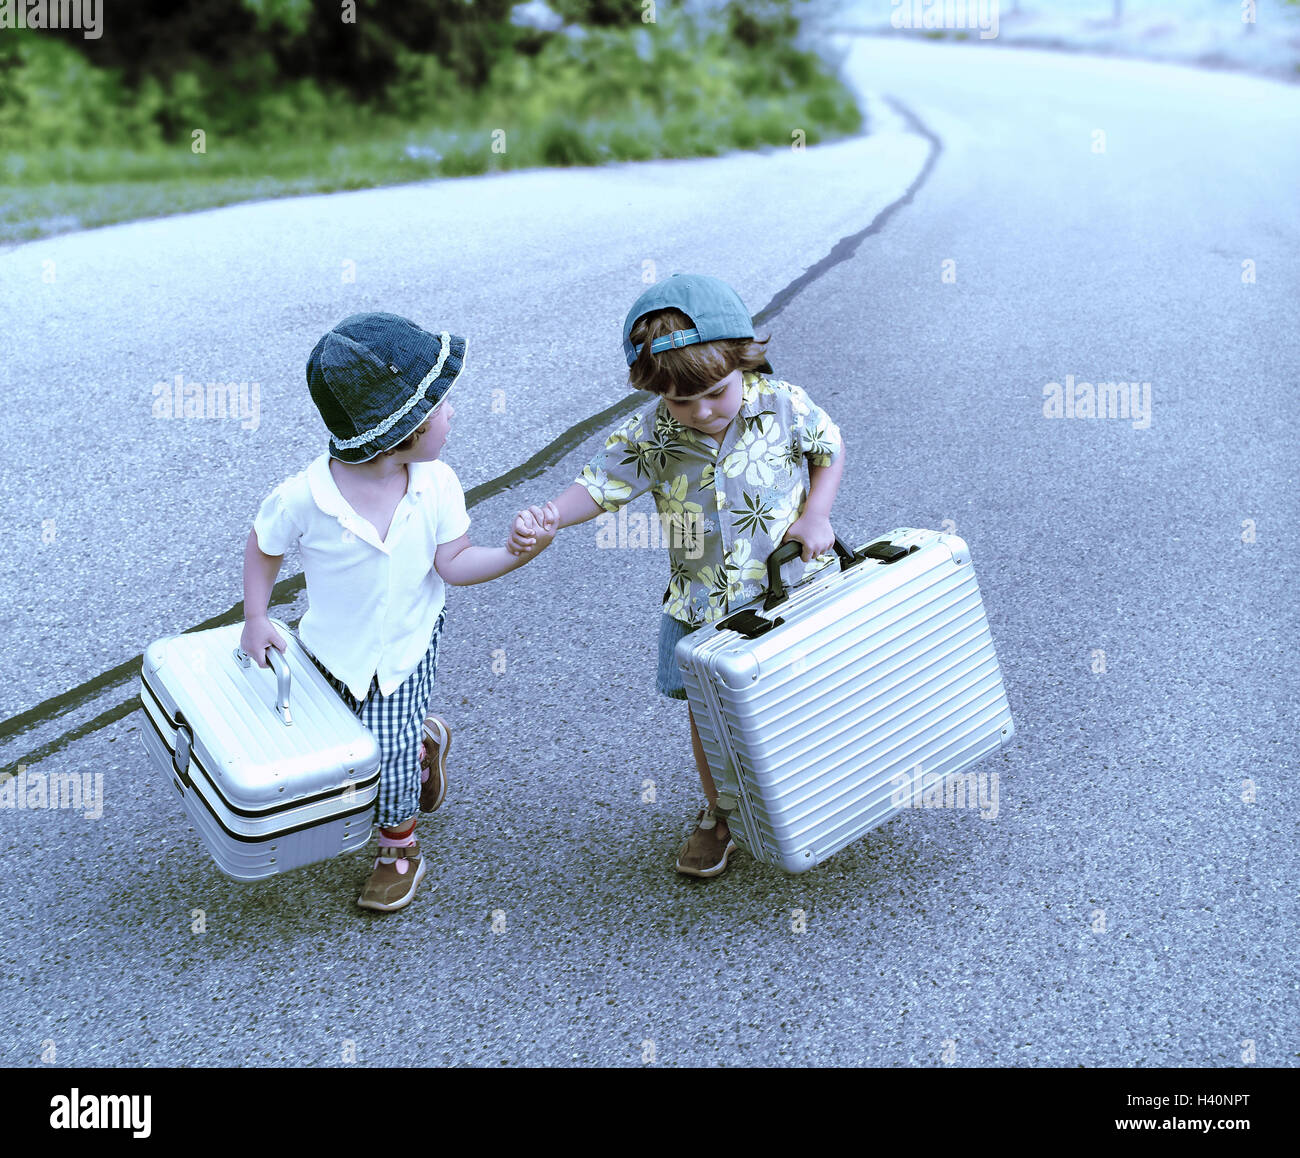 Roadside, infants, suitcases, hand in hand, run away, hold children, siblings, sisters, 3 years, friends, friendship, childhood, hands, luggage, outlier, break away, ausbüchsen, go, run away, together, together, cohesion, unattended, independence, obligat Stock Photo